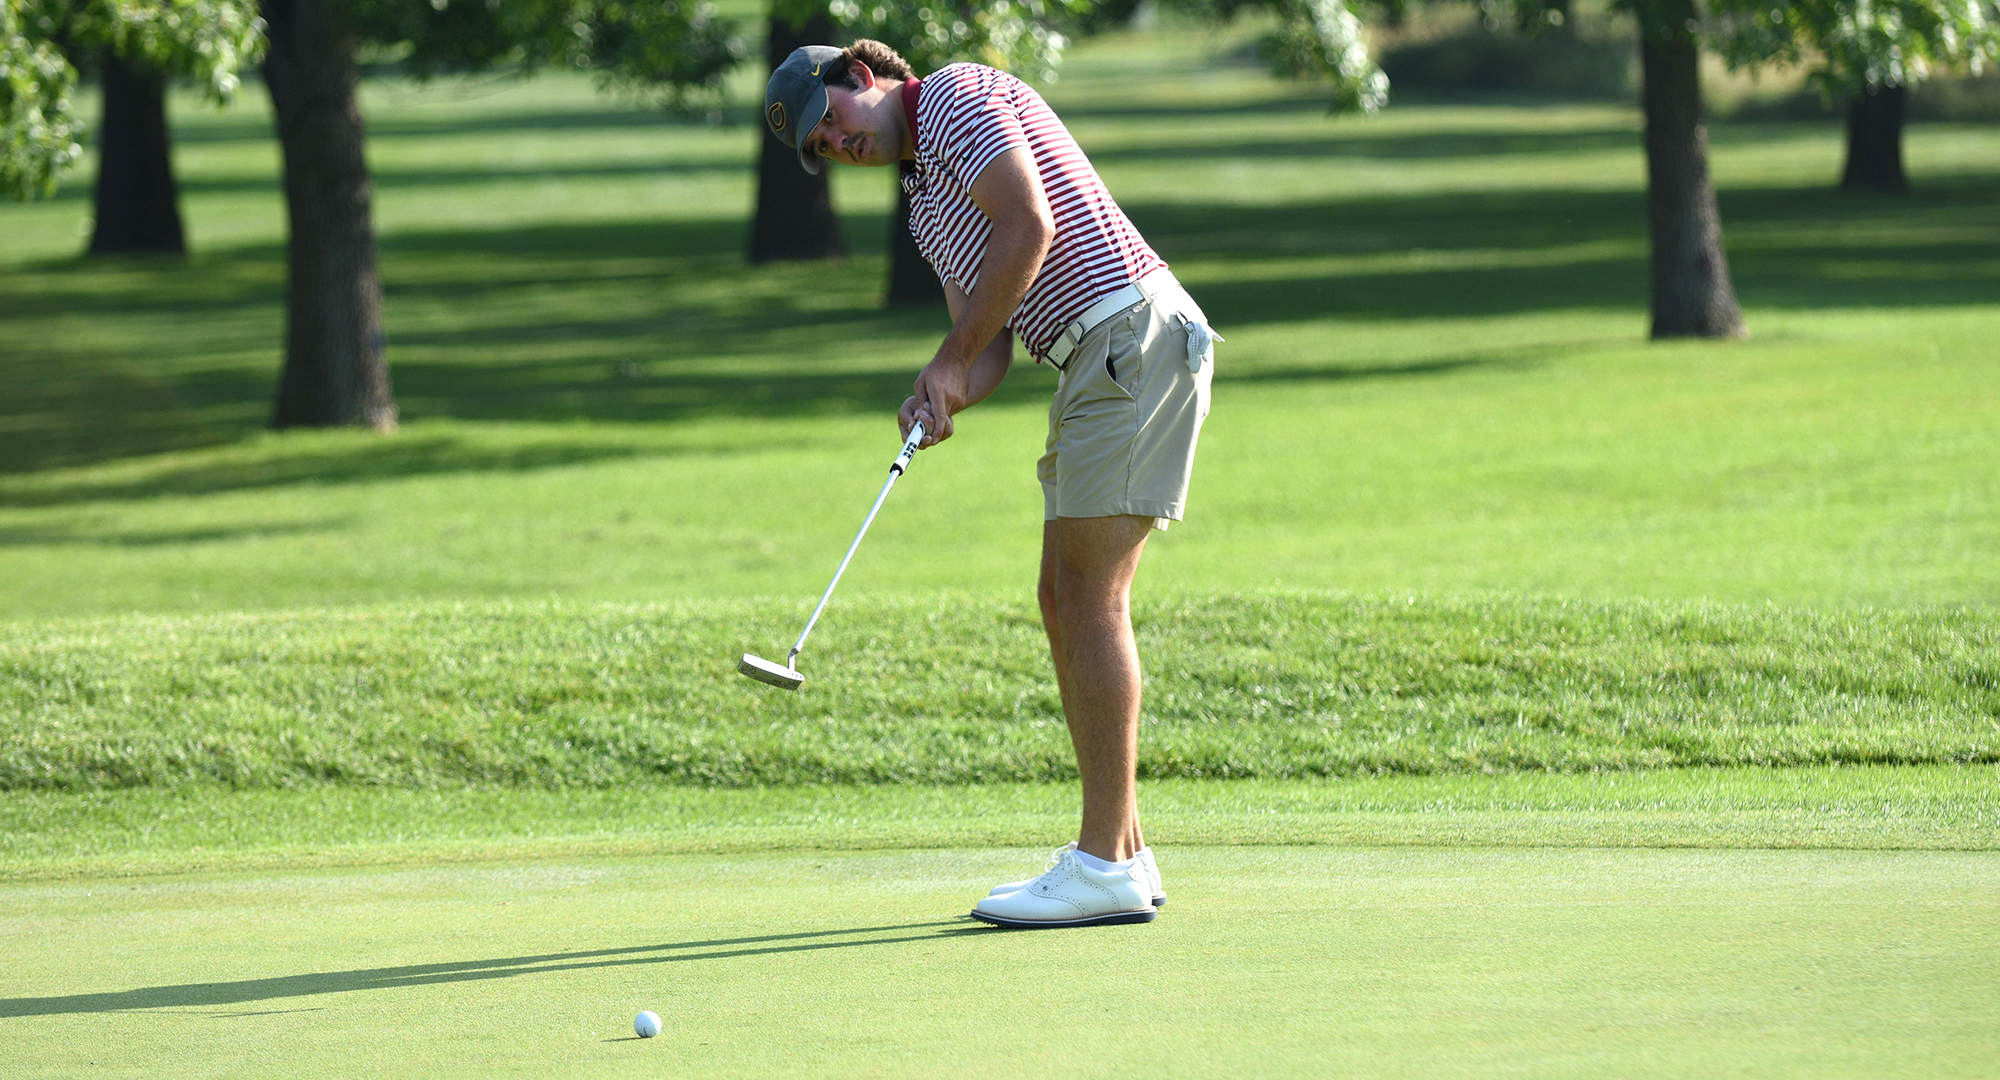 Senior Ryan Jenson was the most consistent Cobber golfer at the Gustavus Invite. He shot rounds of 76 and 75 to finish in a tie for 20th place.